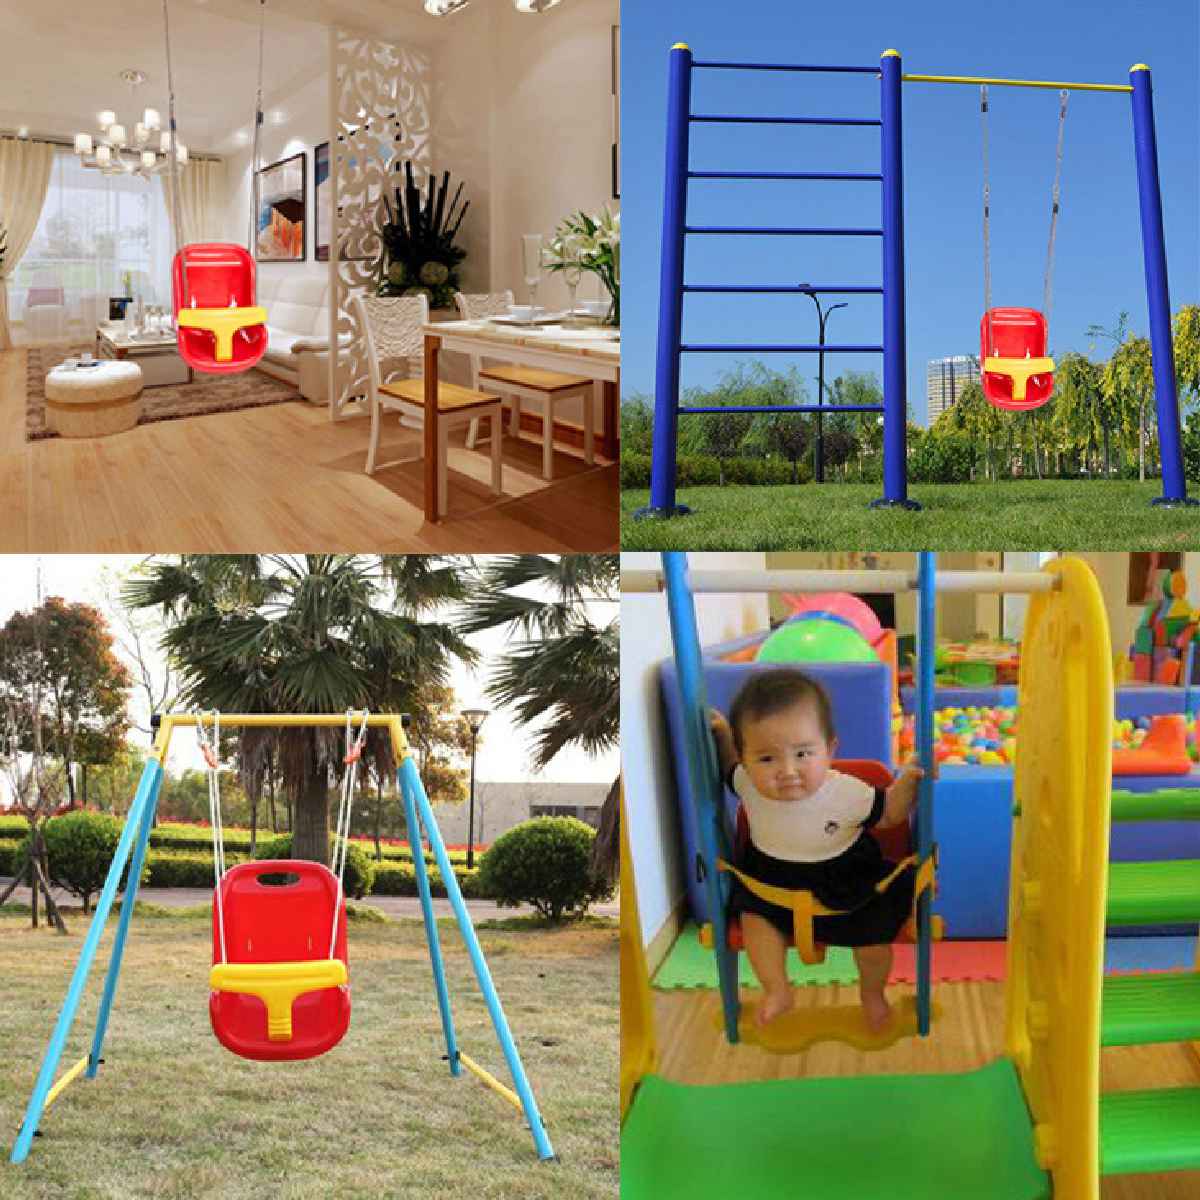 Plastic Garden Swing Chair For Baby Kids Hanging Seat Toys Indoor Outdoor Toys Swing Chair